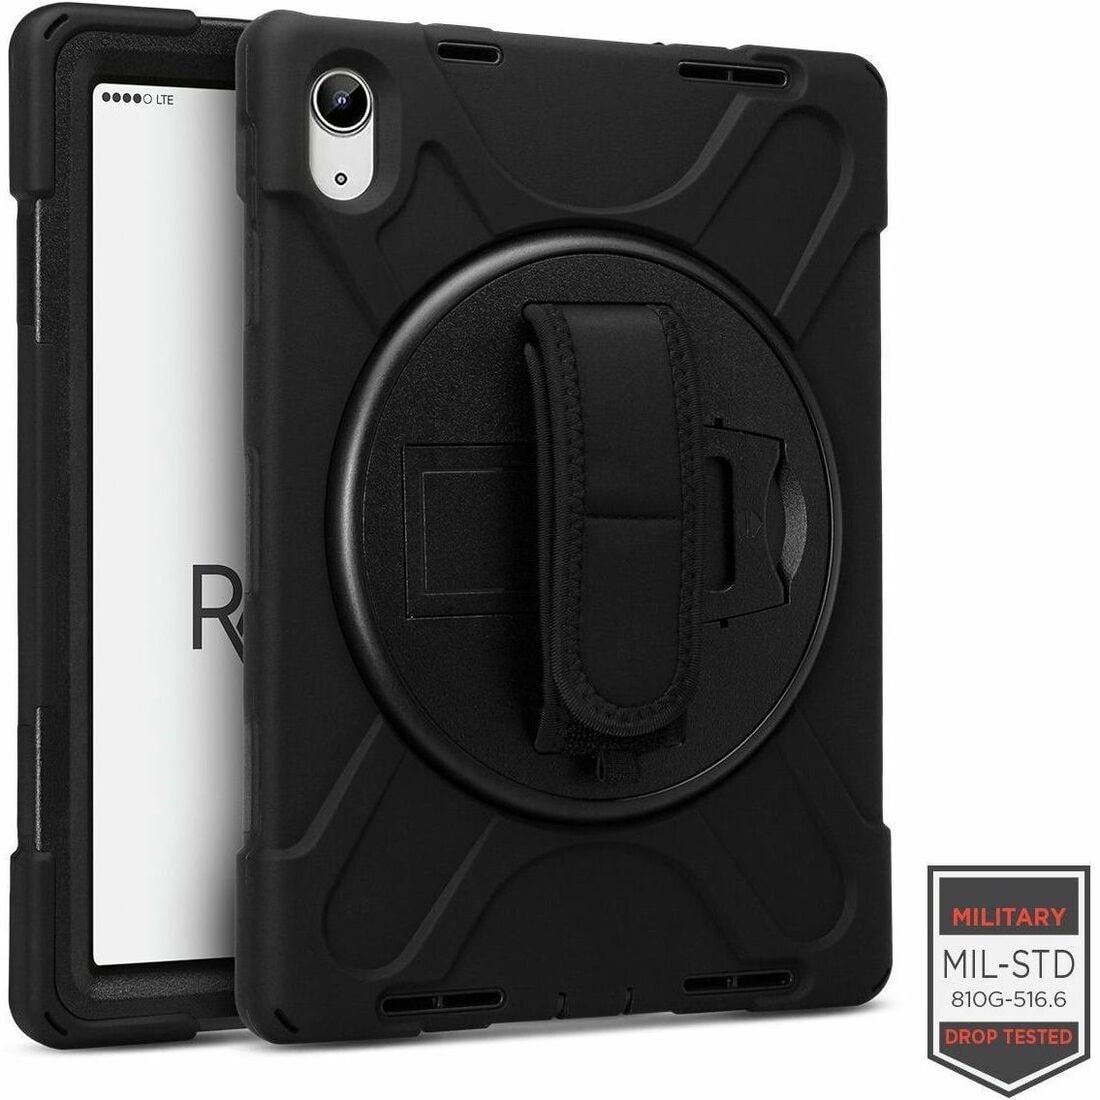 Cellairis Rapture Rugged Carrying Case